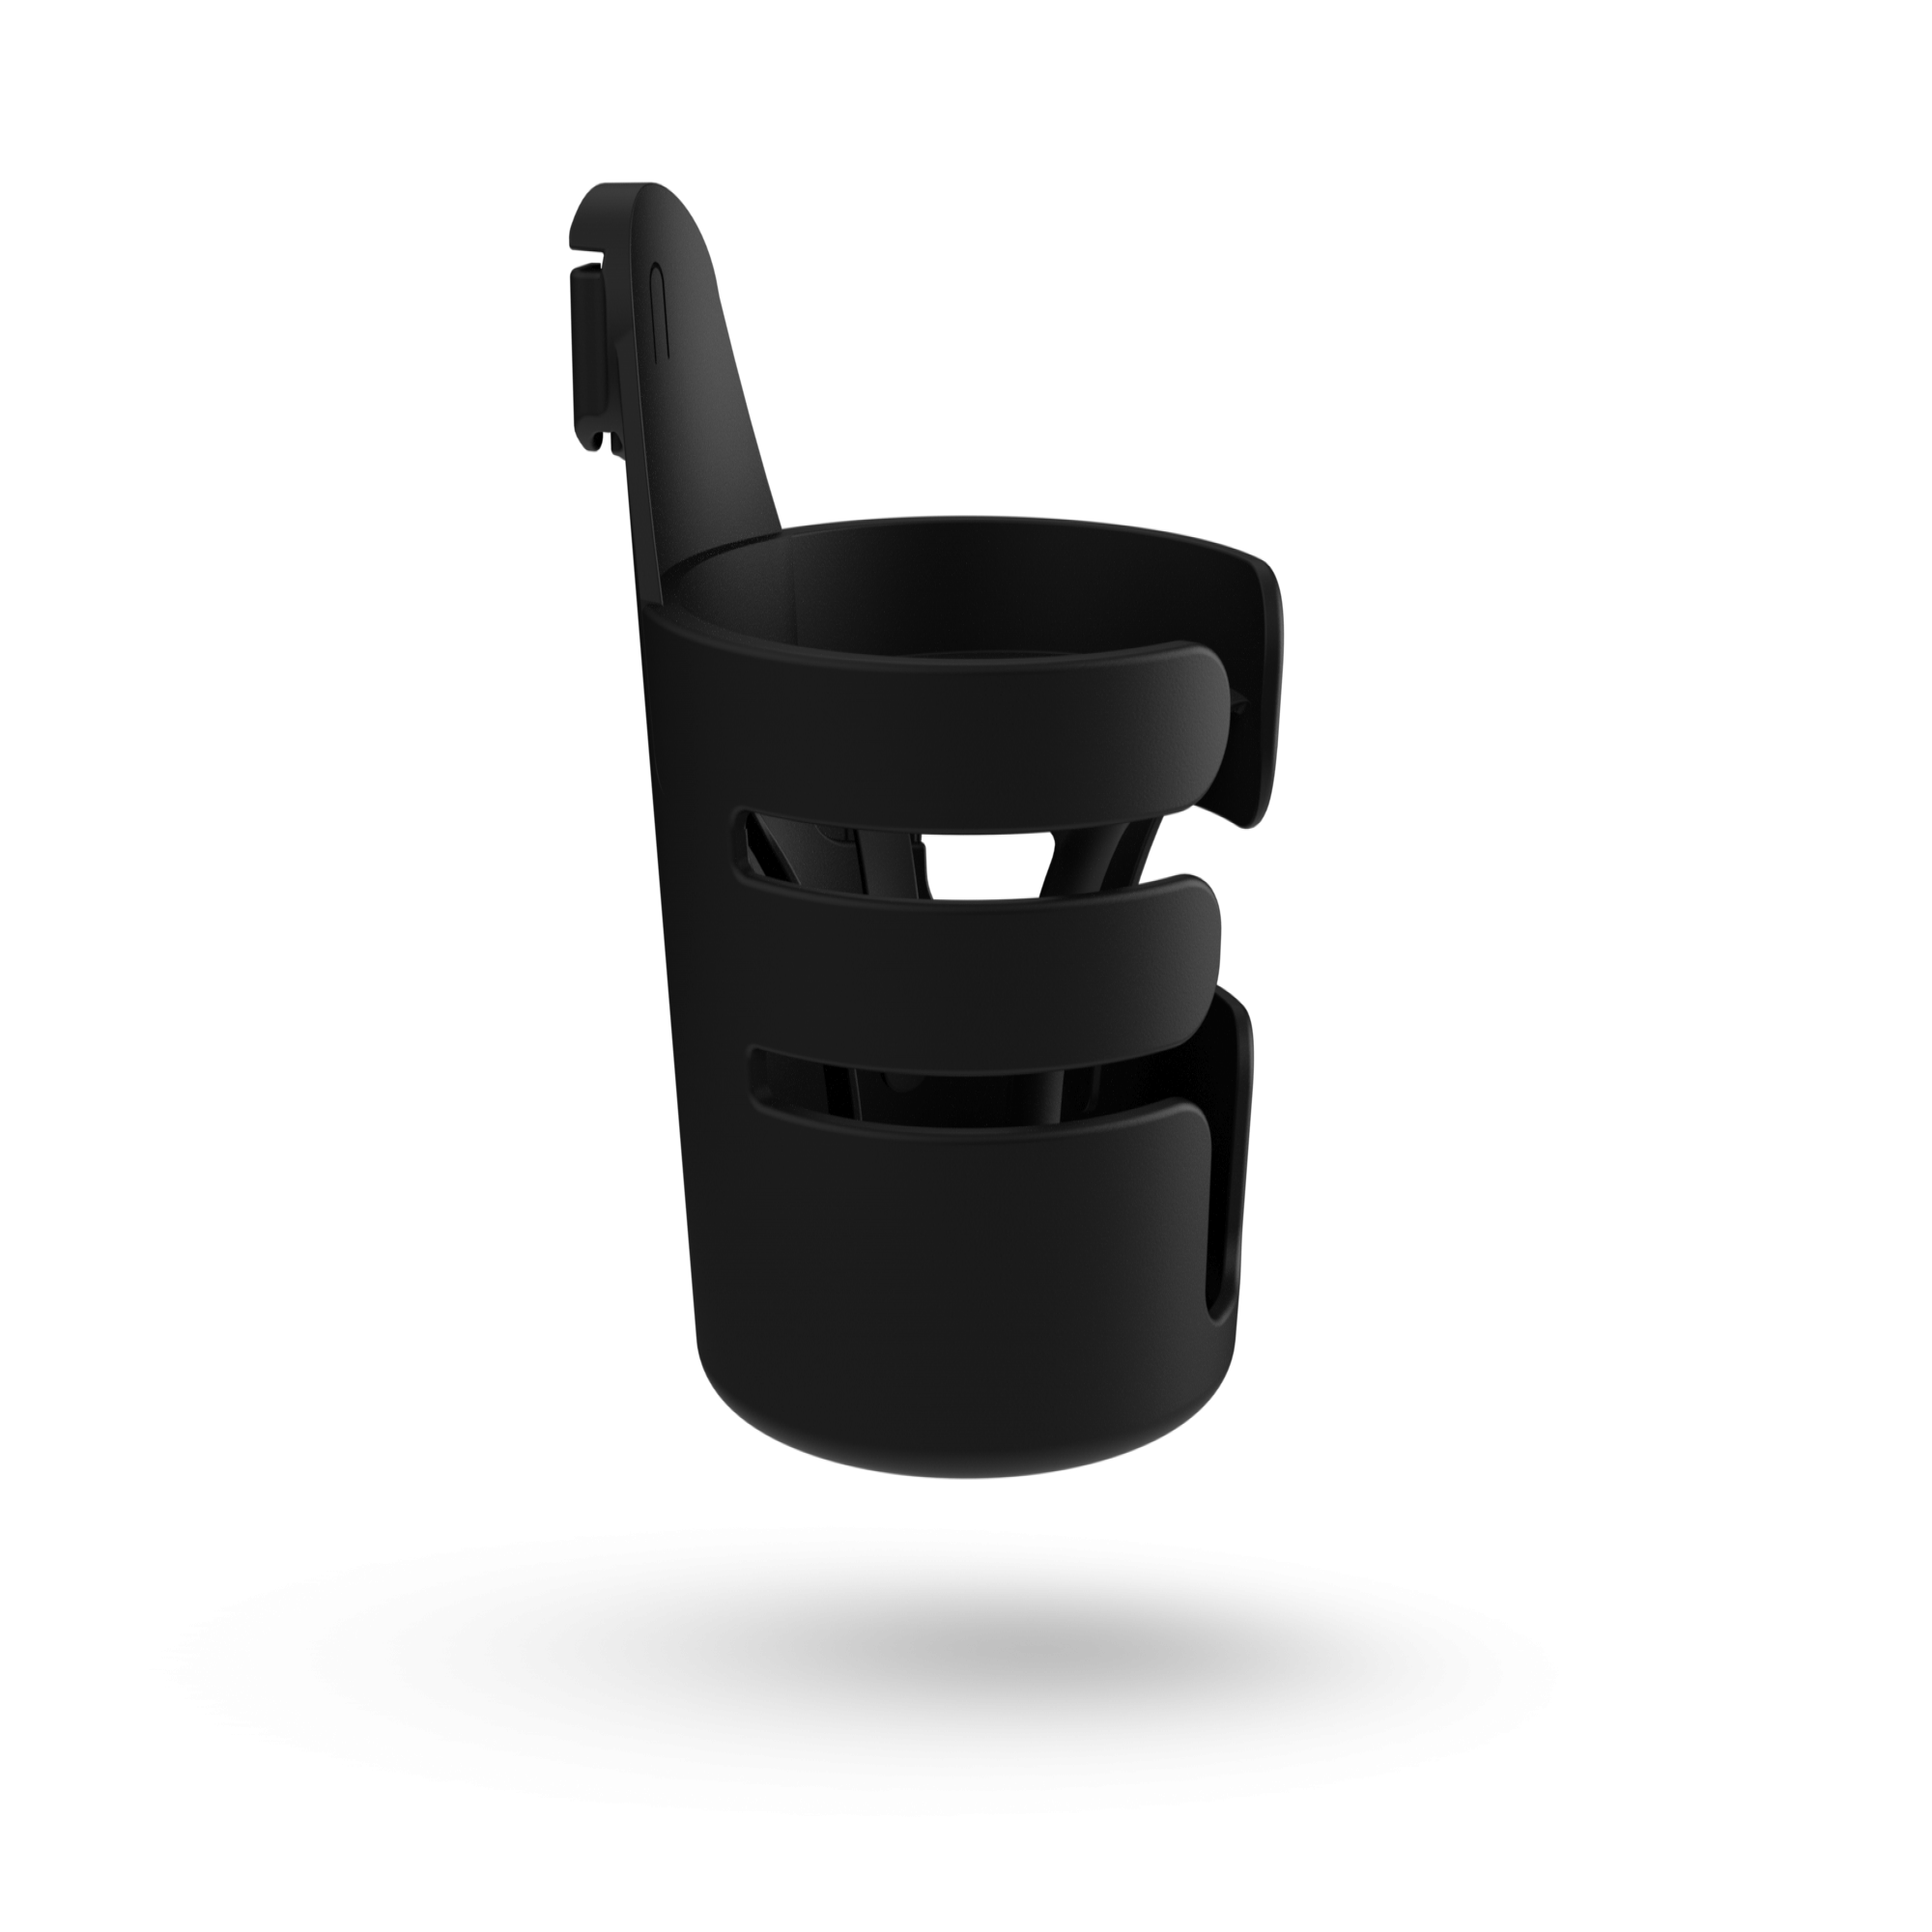 bugaboo bee 5 cup holder